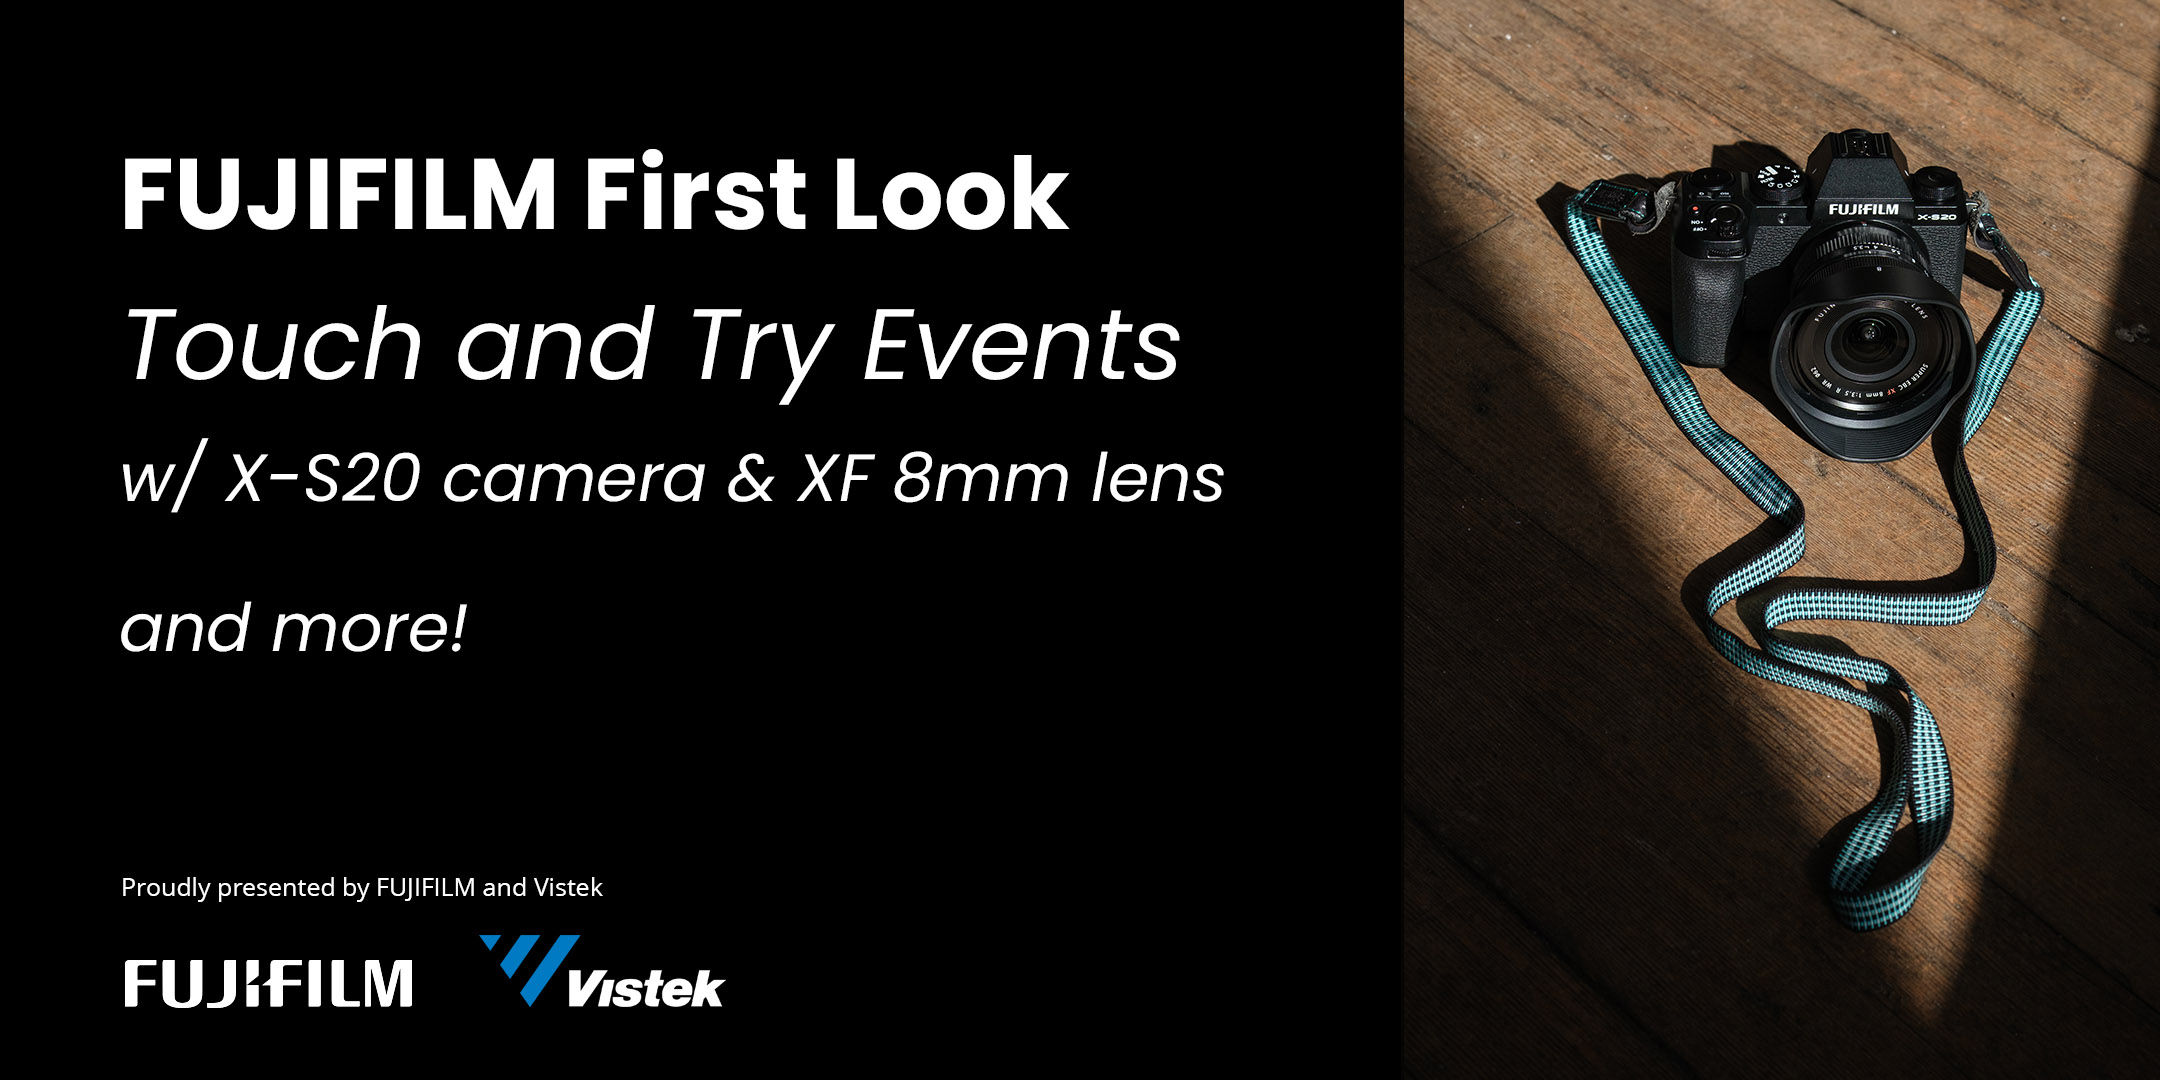 FUJIFILM First Look Touch and Try Events